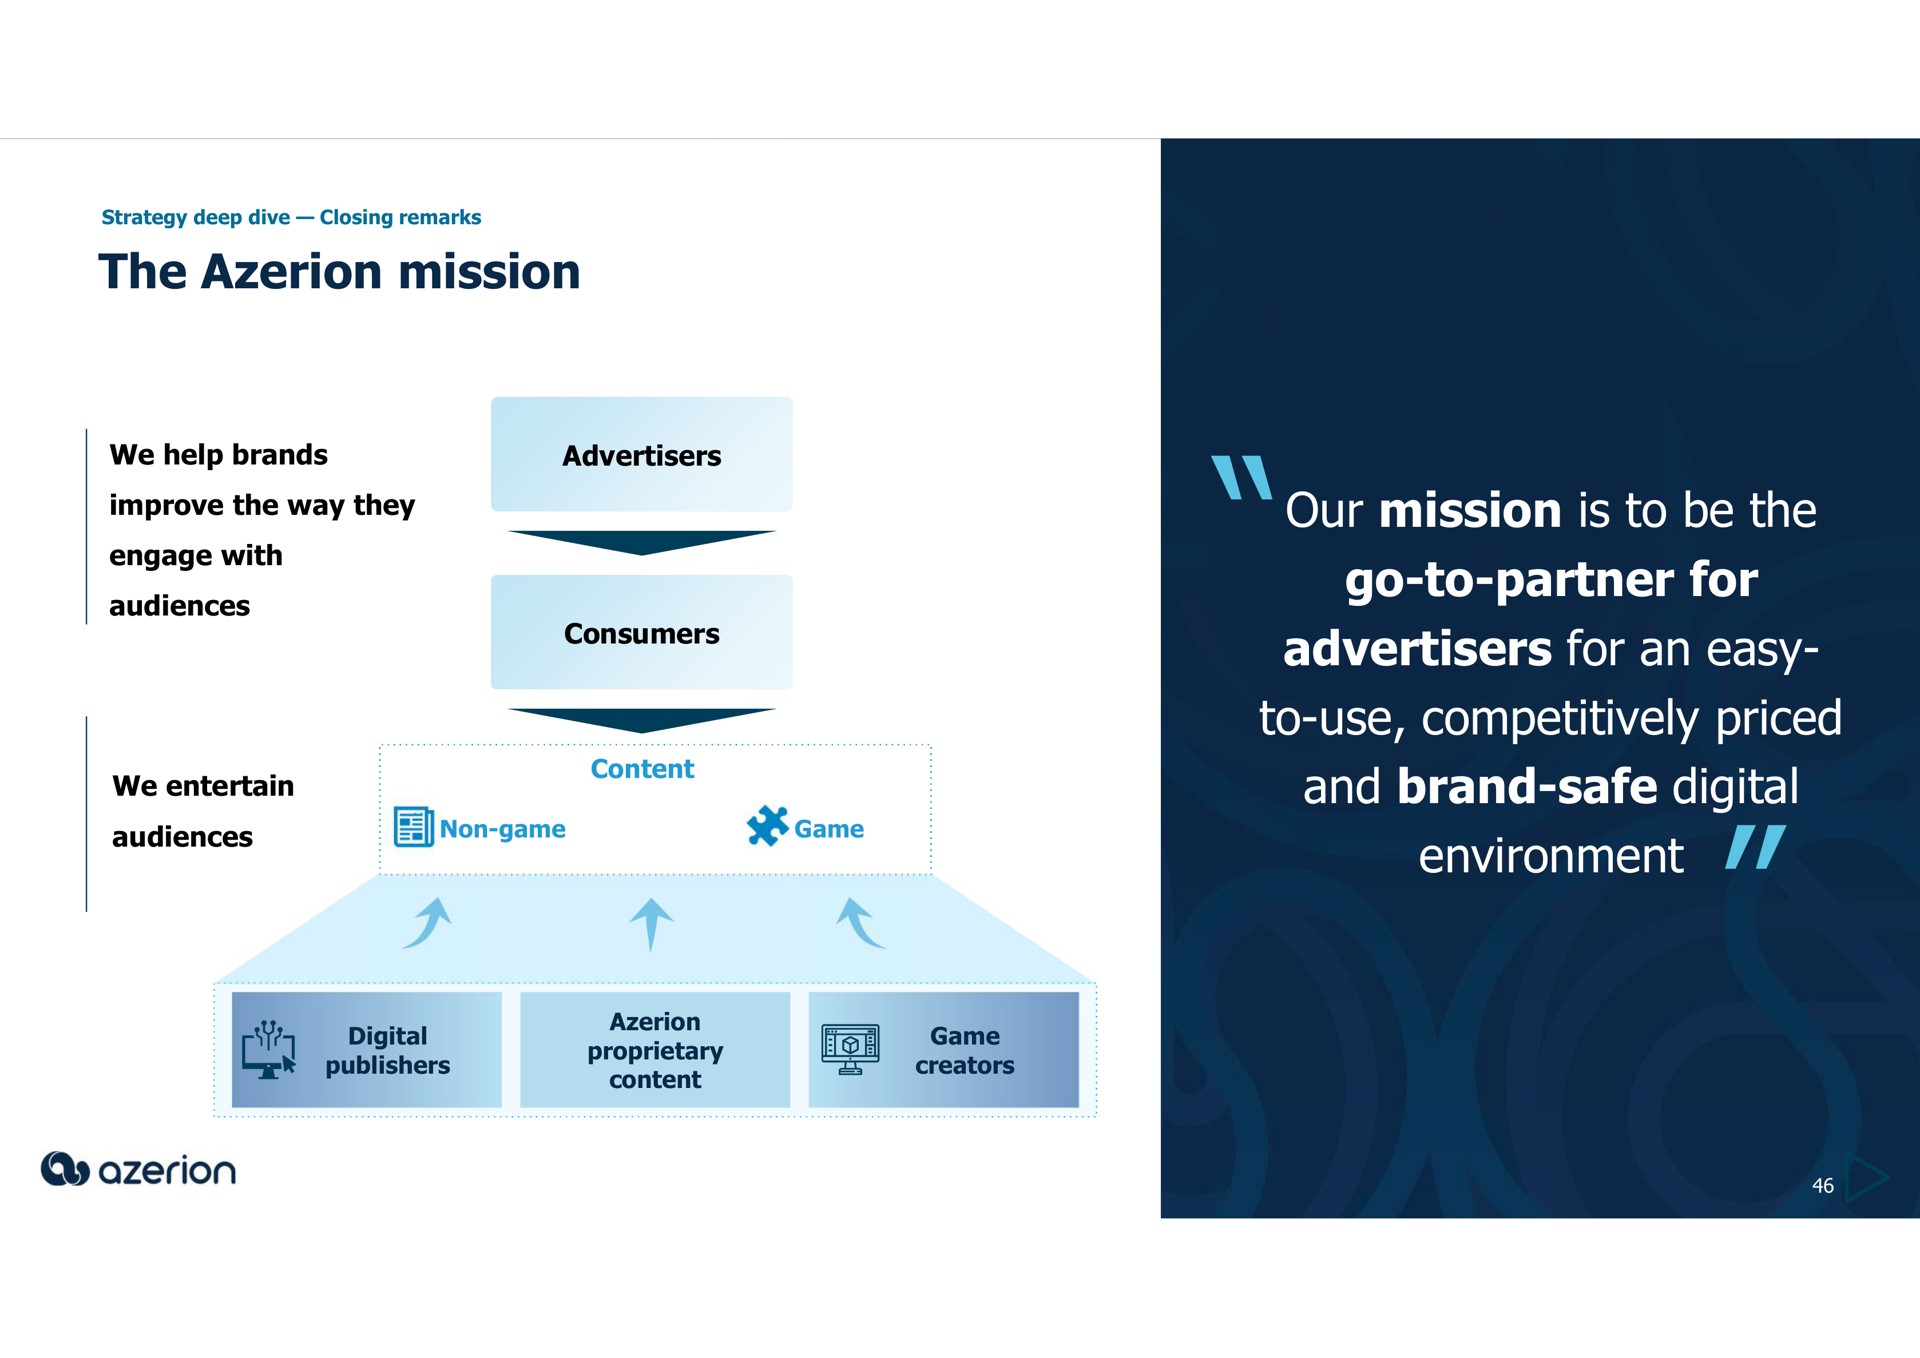 the mission our mission is to be the go to partner for advertisers for an easy to use competitively priced and brand safe digital environment improve way they engage a content we entertain audiences | Azerion